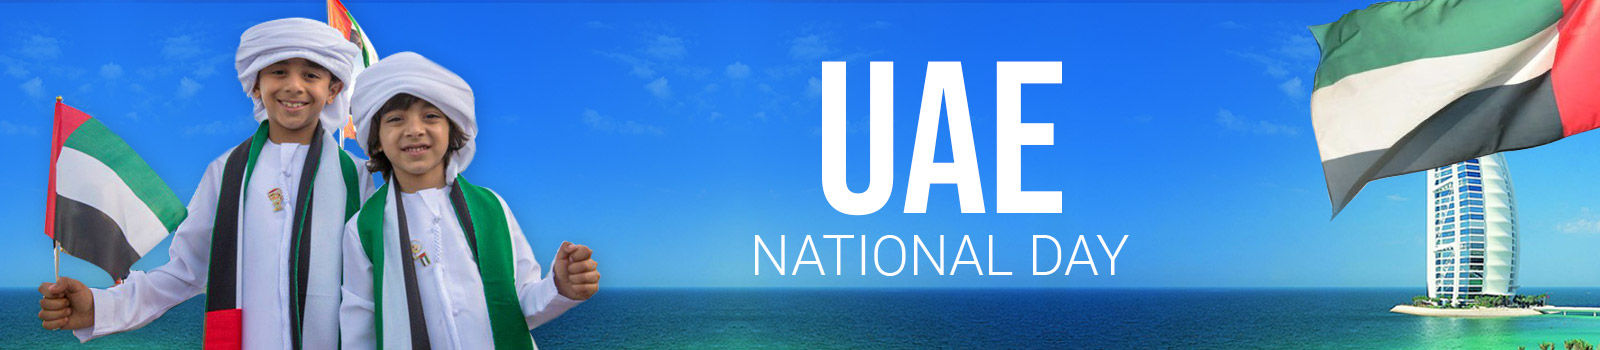 About UAE National Day